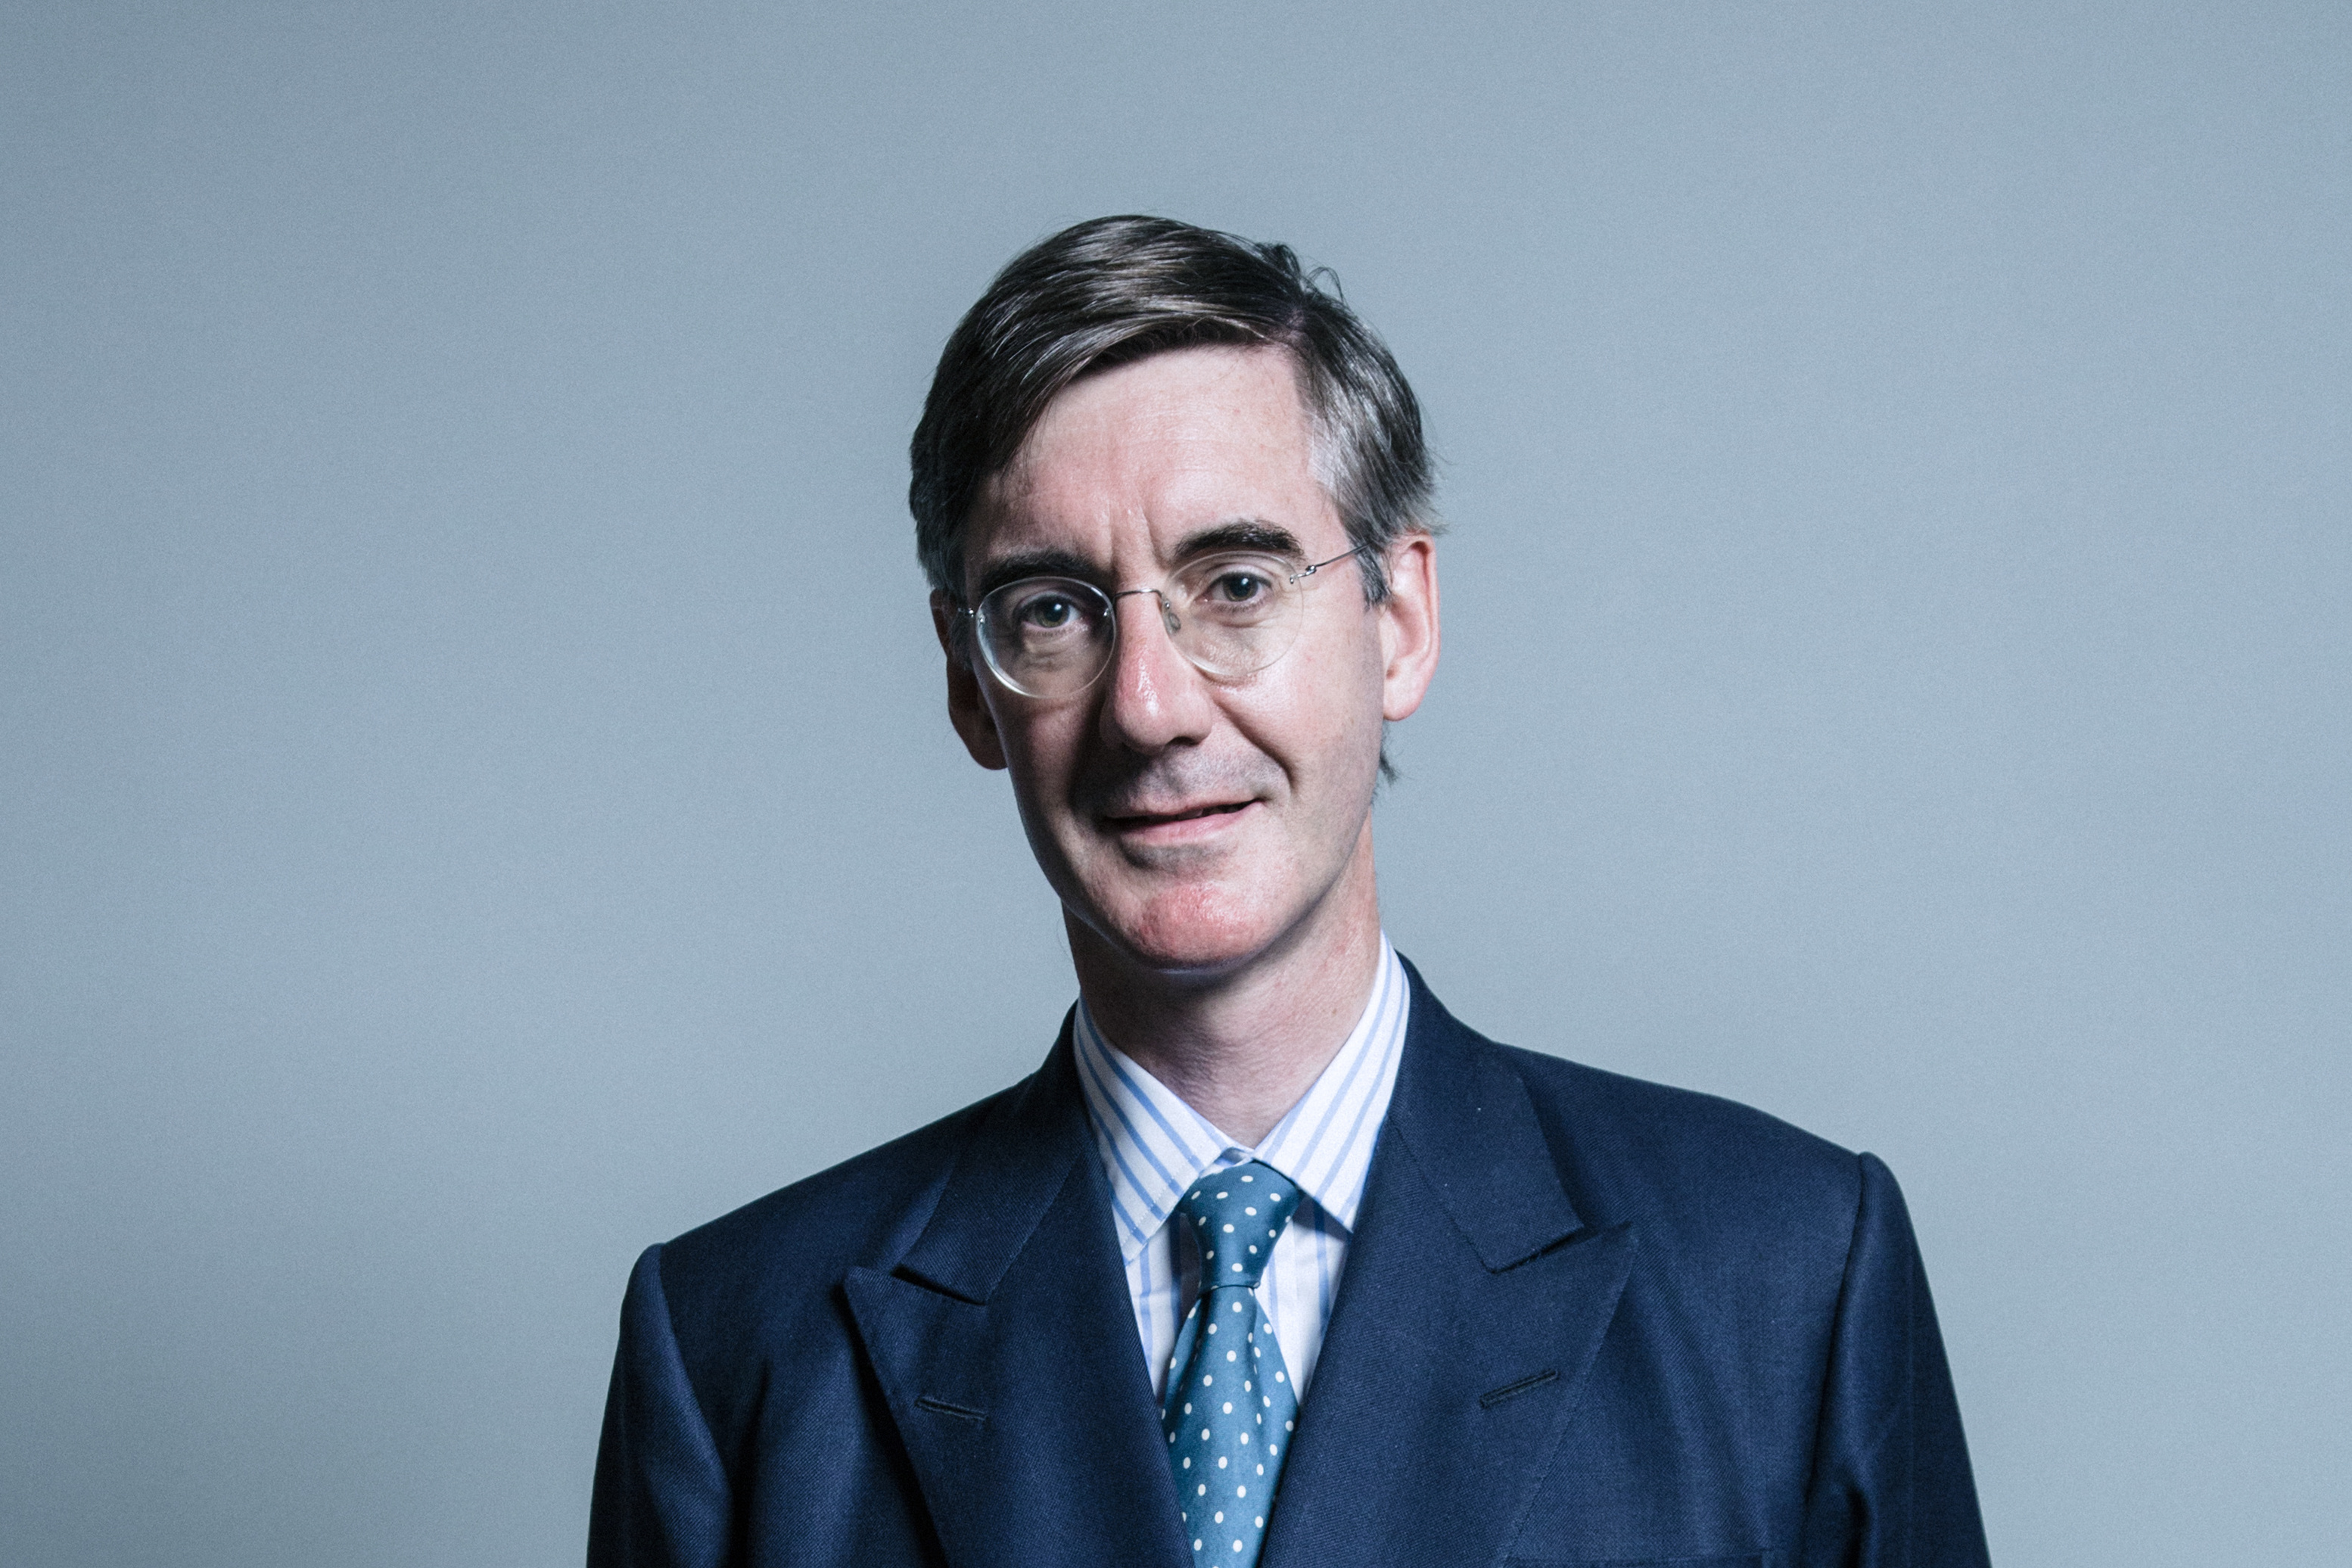 Secretary of State for Business, Energy and Industrial Strategy Jacob Rees-Mogg